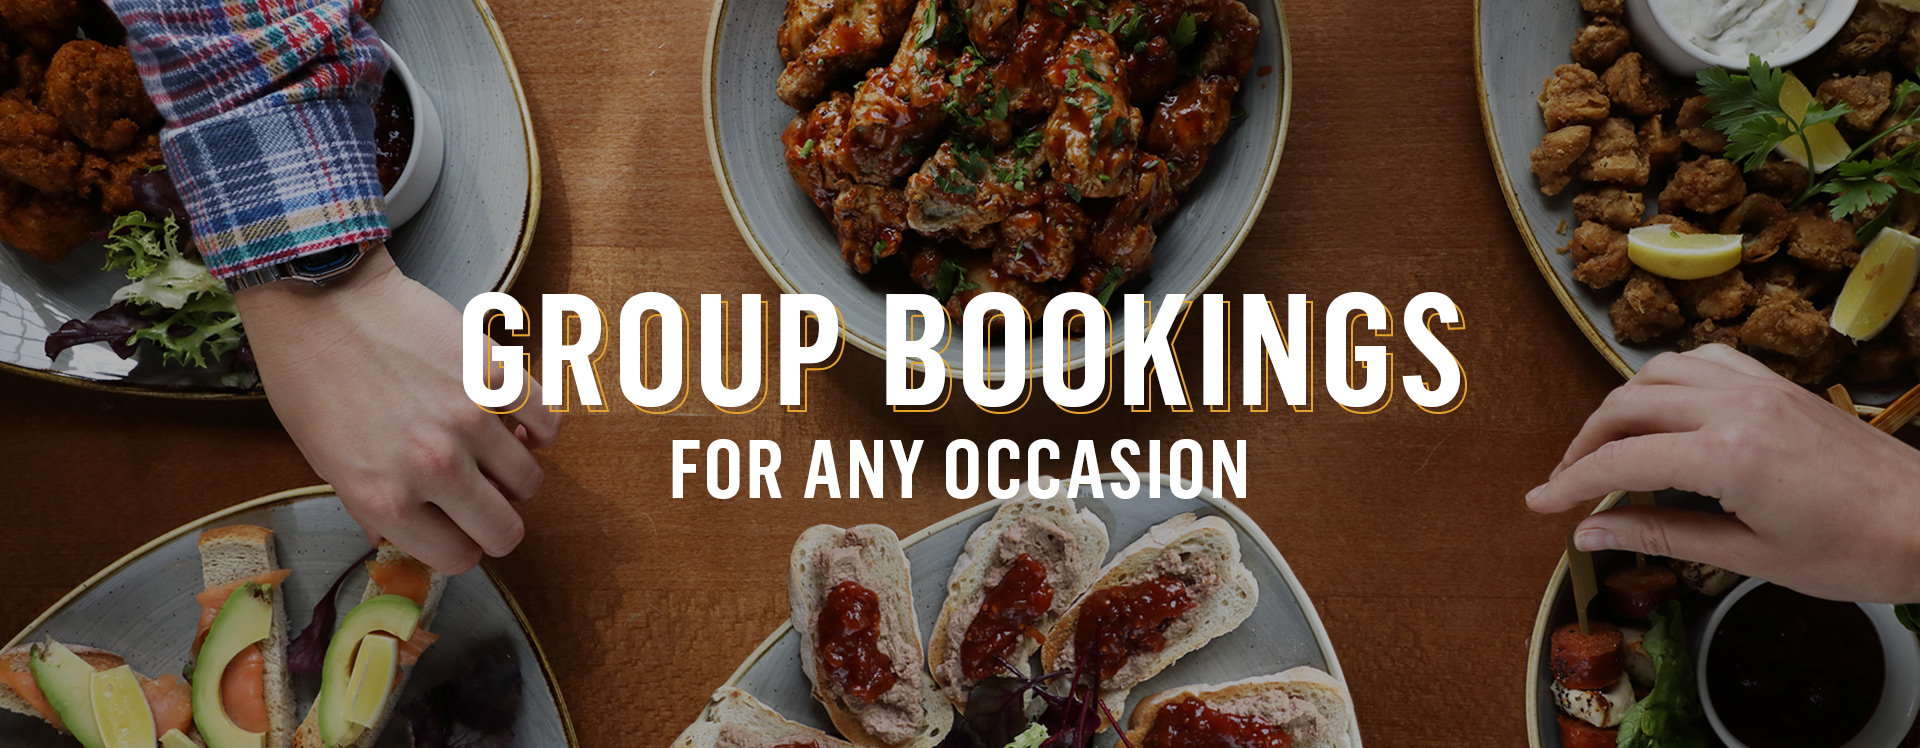 Group Bookings at Rose Street Brewery